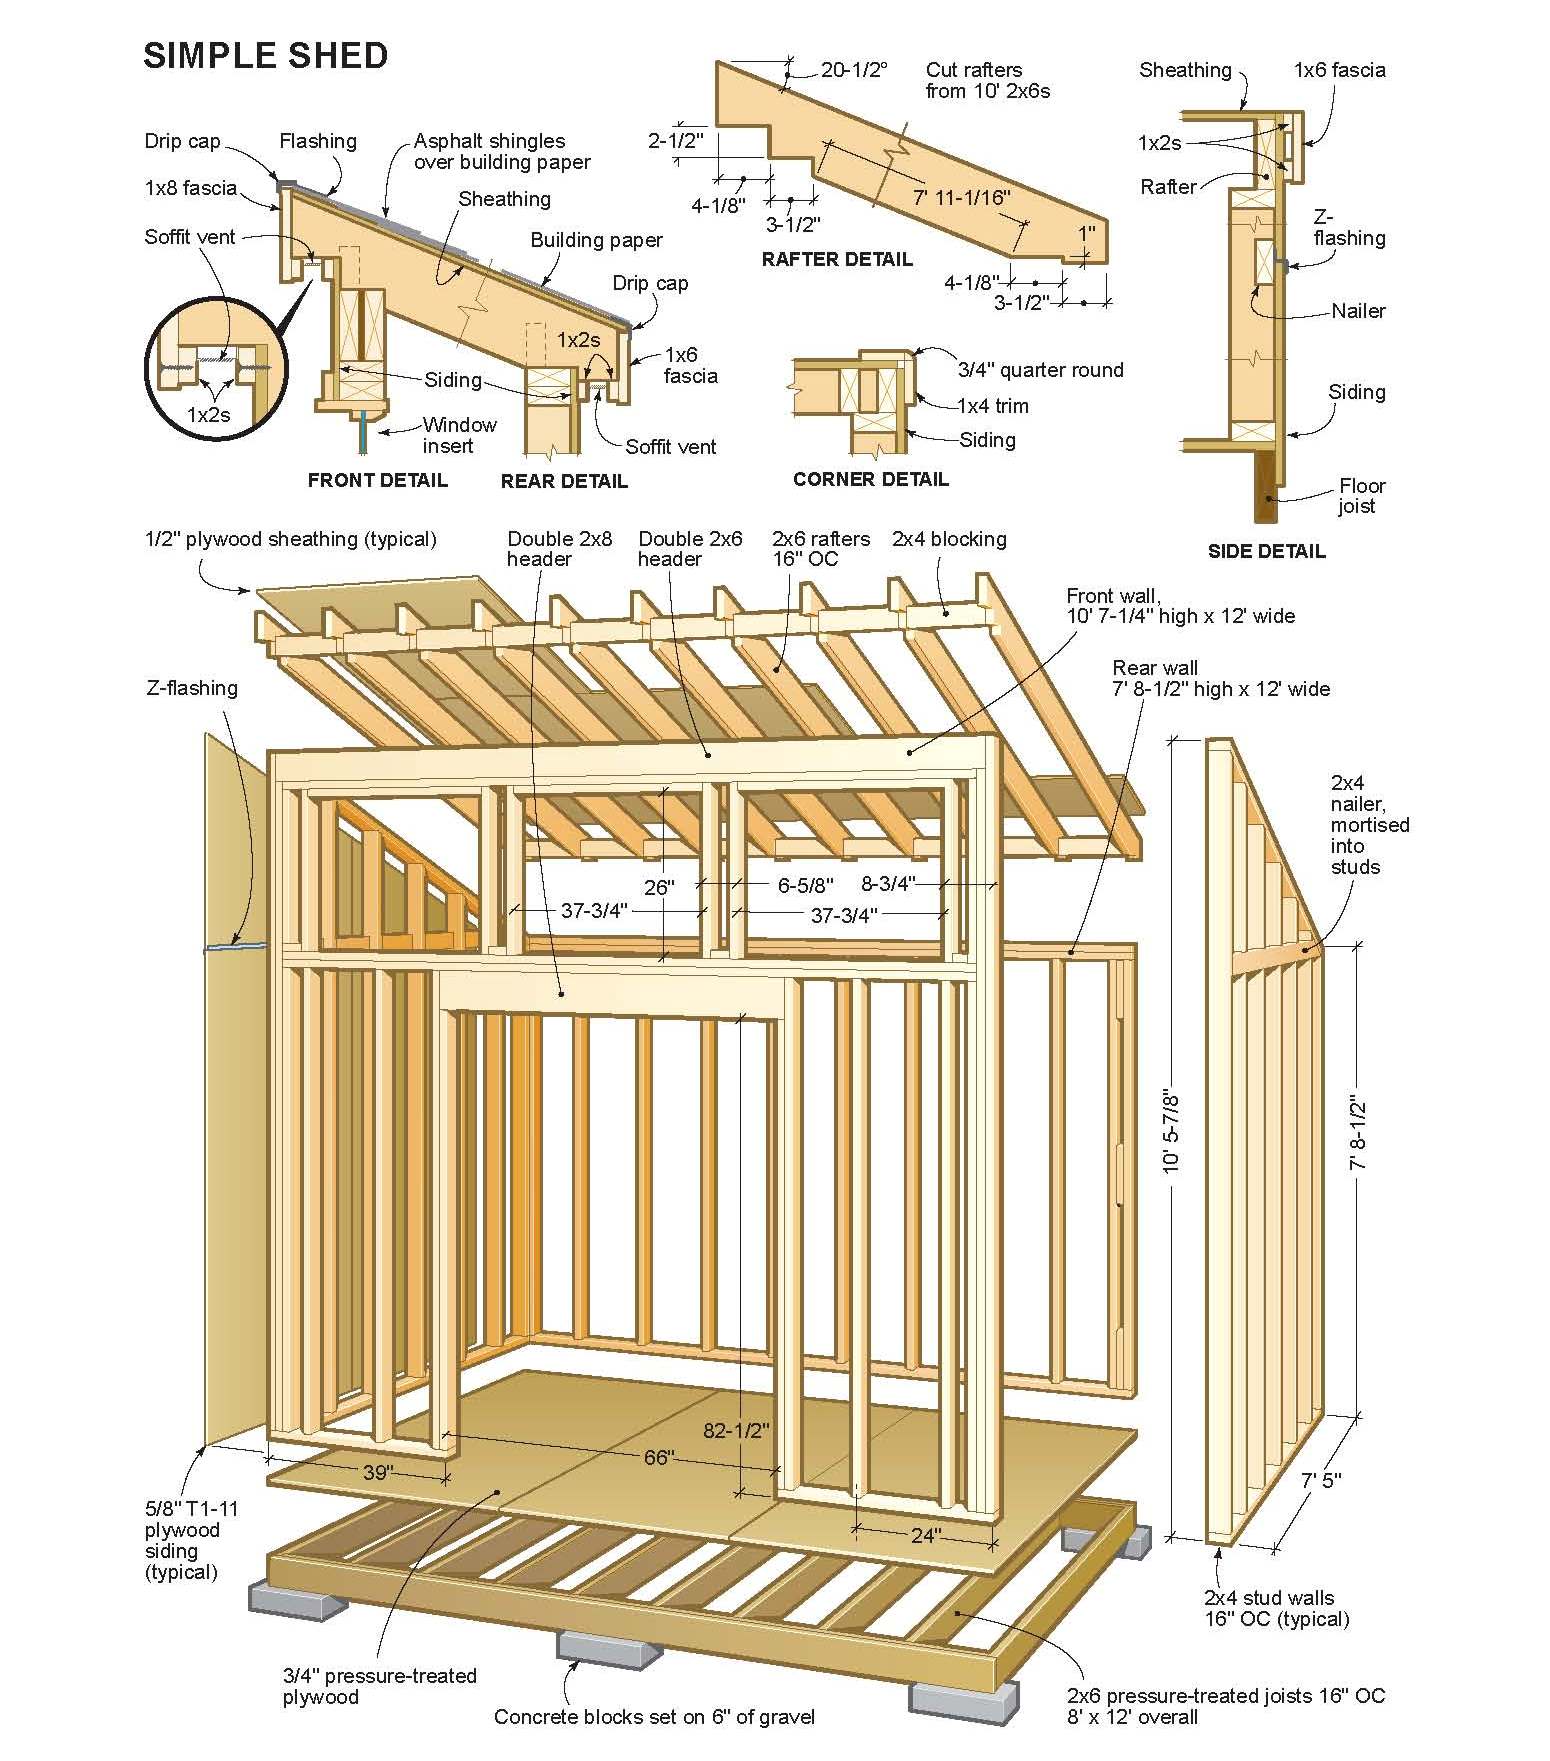 Harsley: Firewood shed designs free